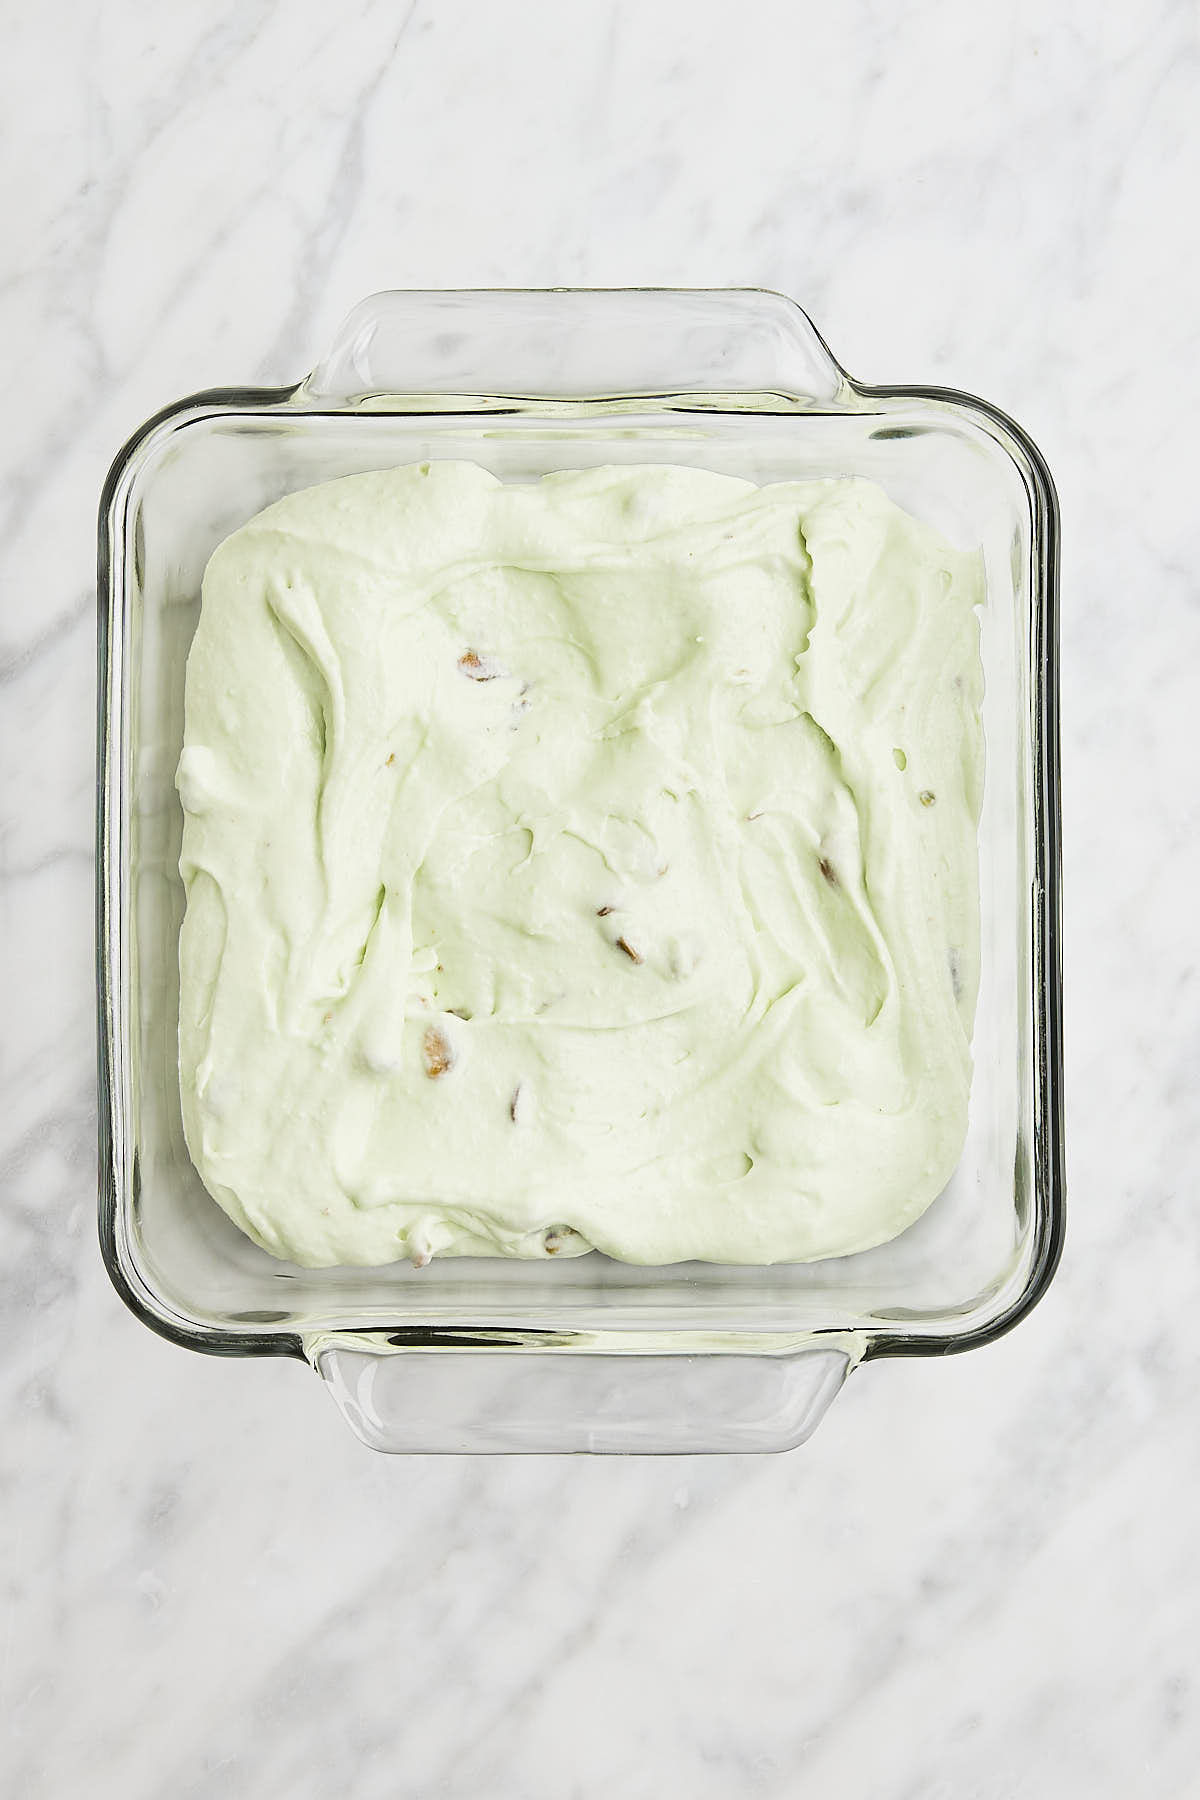 Pistachio Ice Cream in a 9x9 dish before being stored in the freezer.